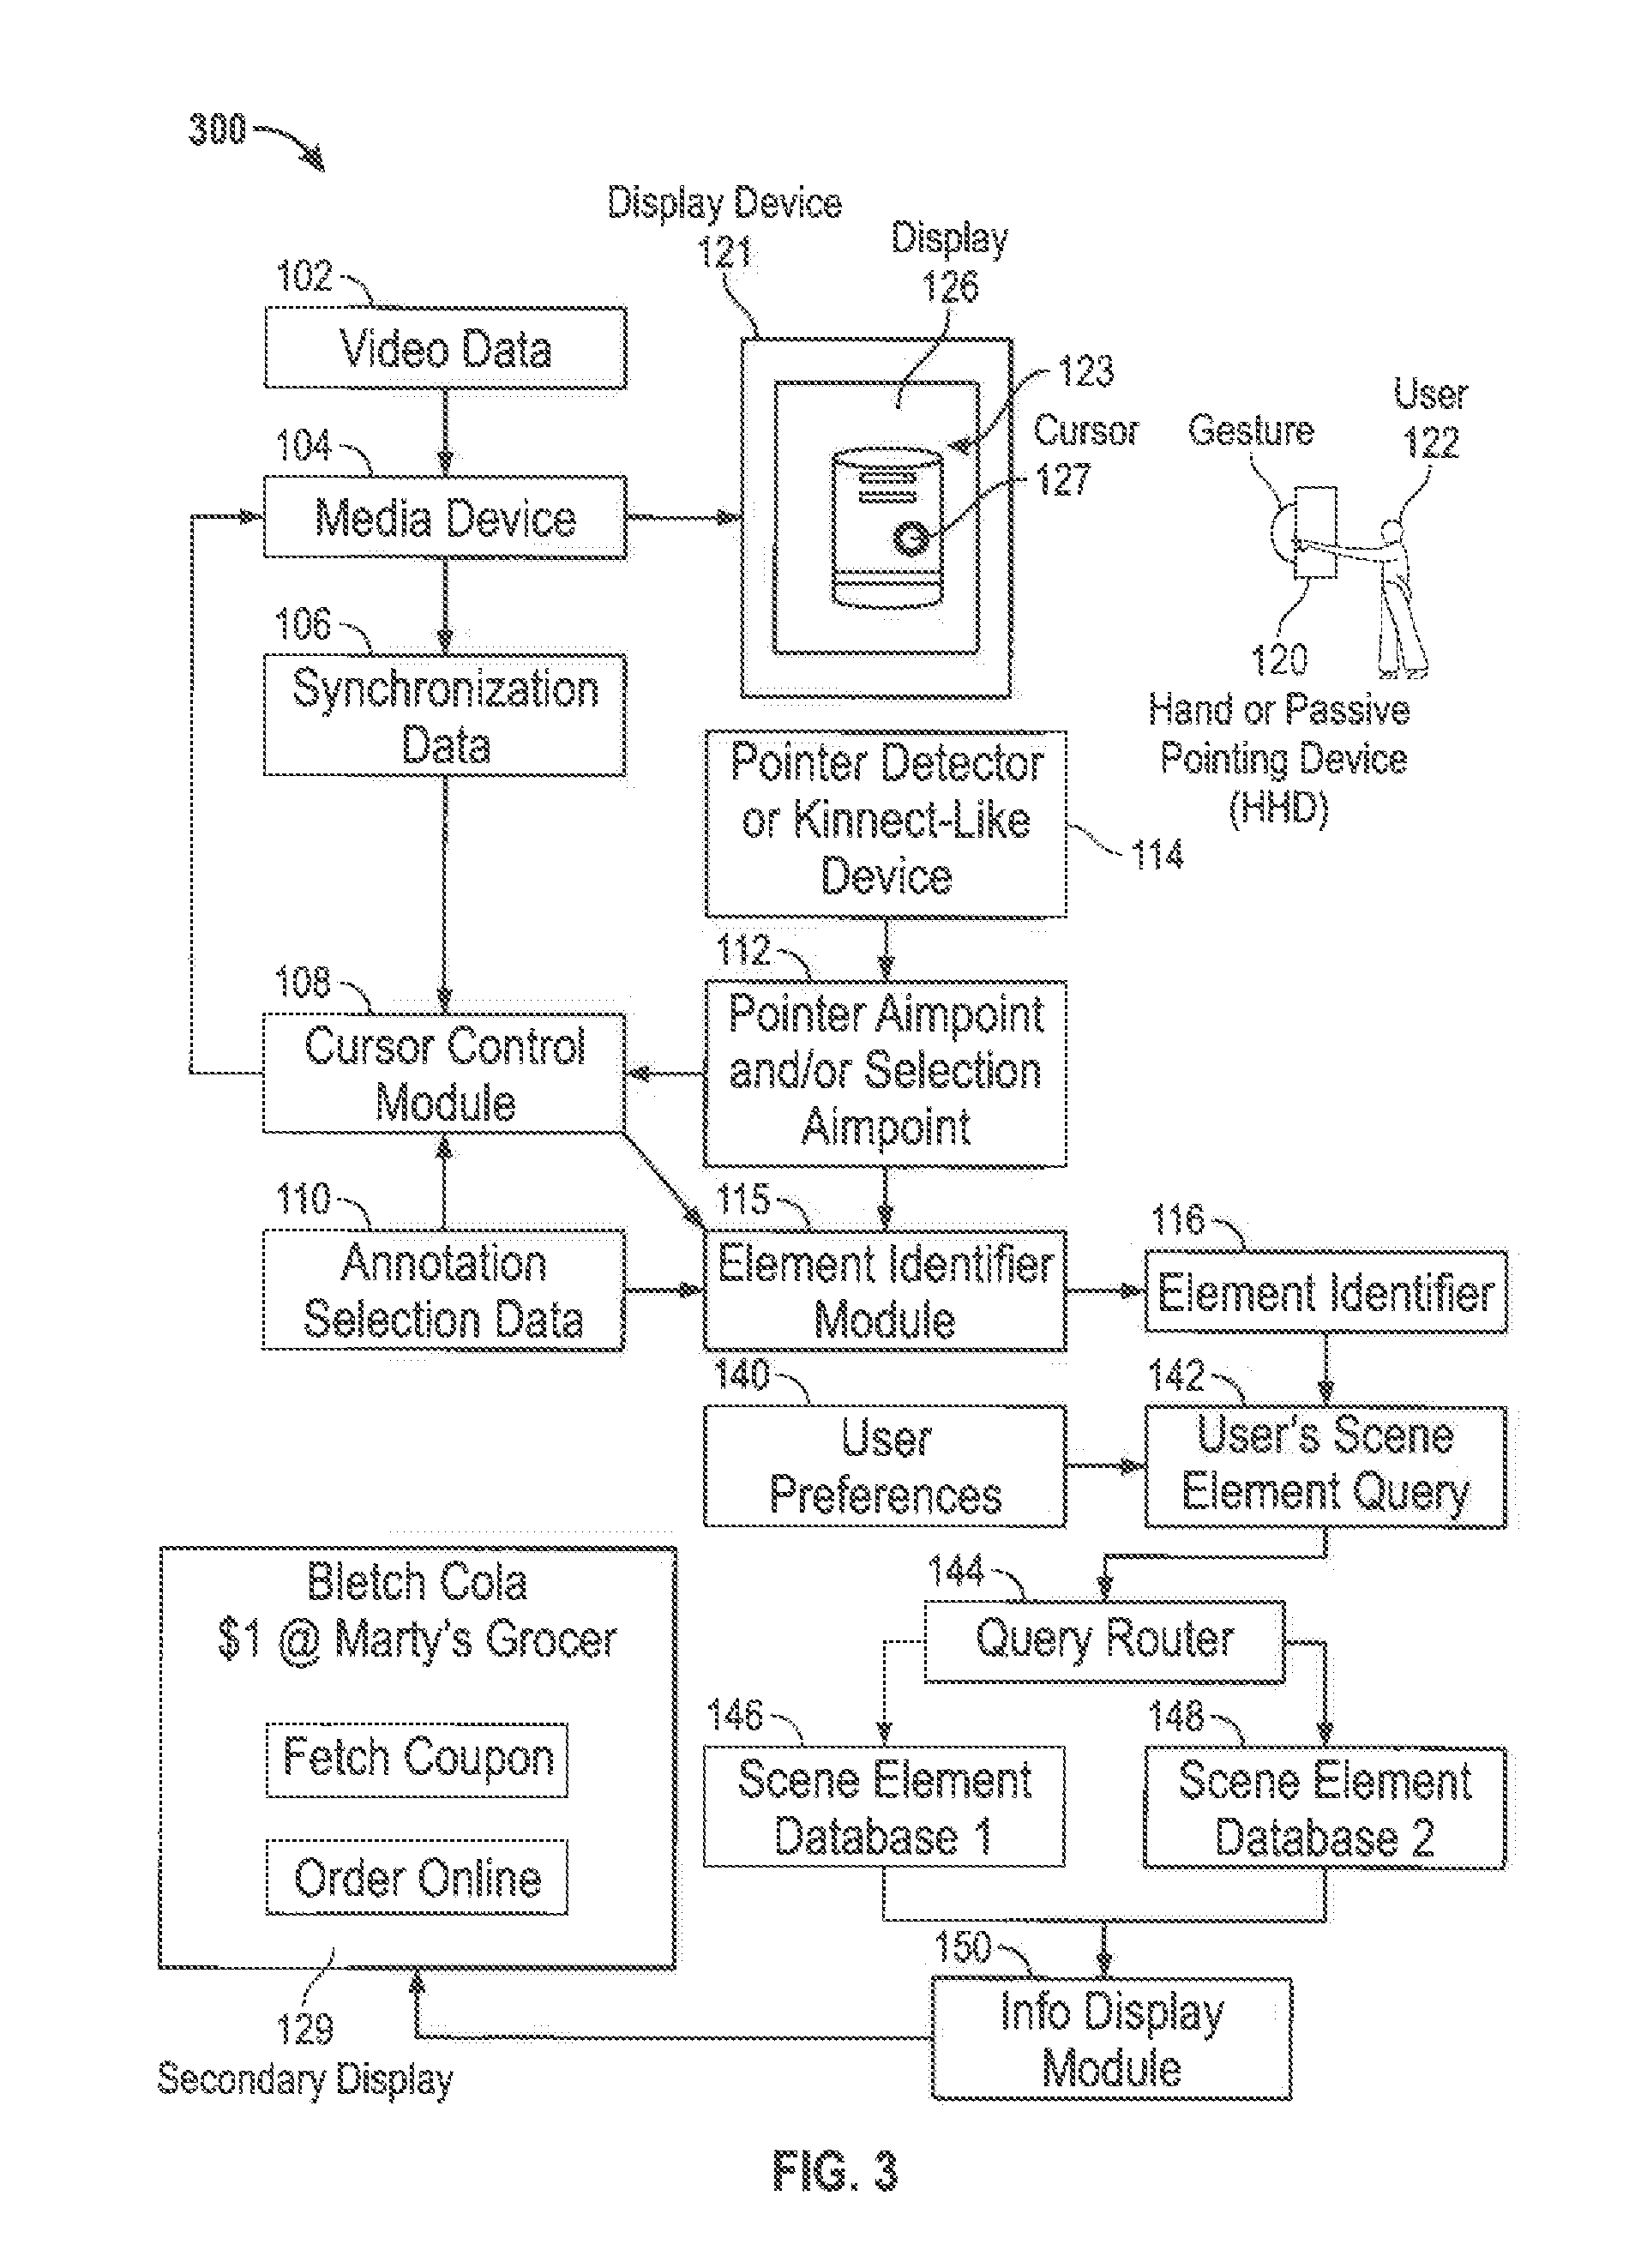 Method, system and computer program product for obtaining and displaying supplemental data about a displayed movie, show, event or video game